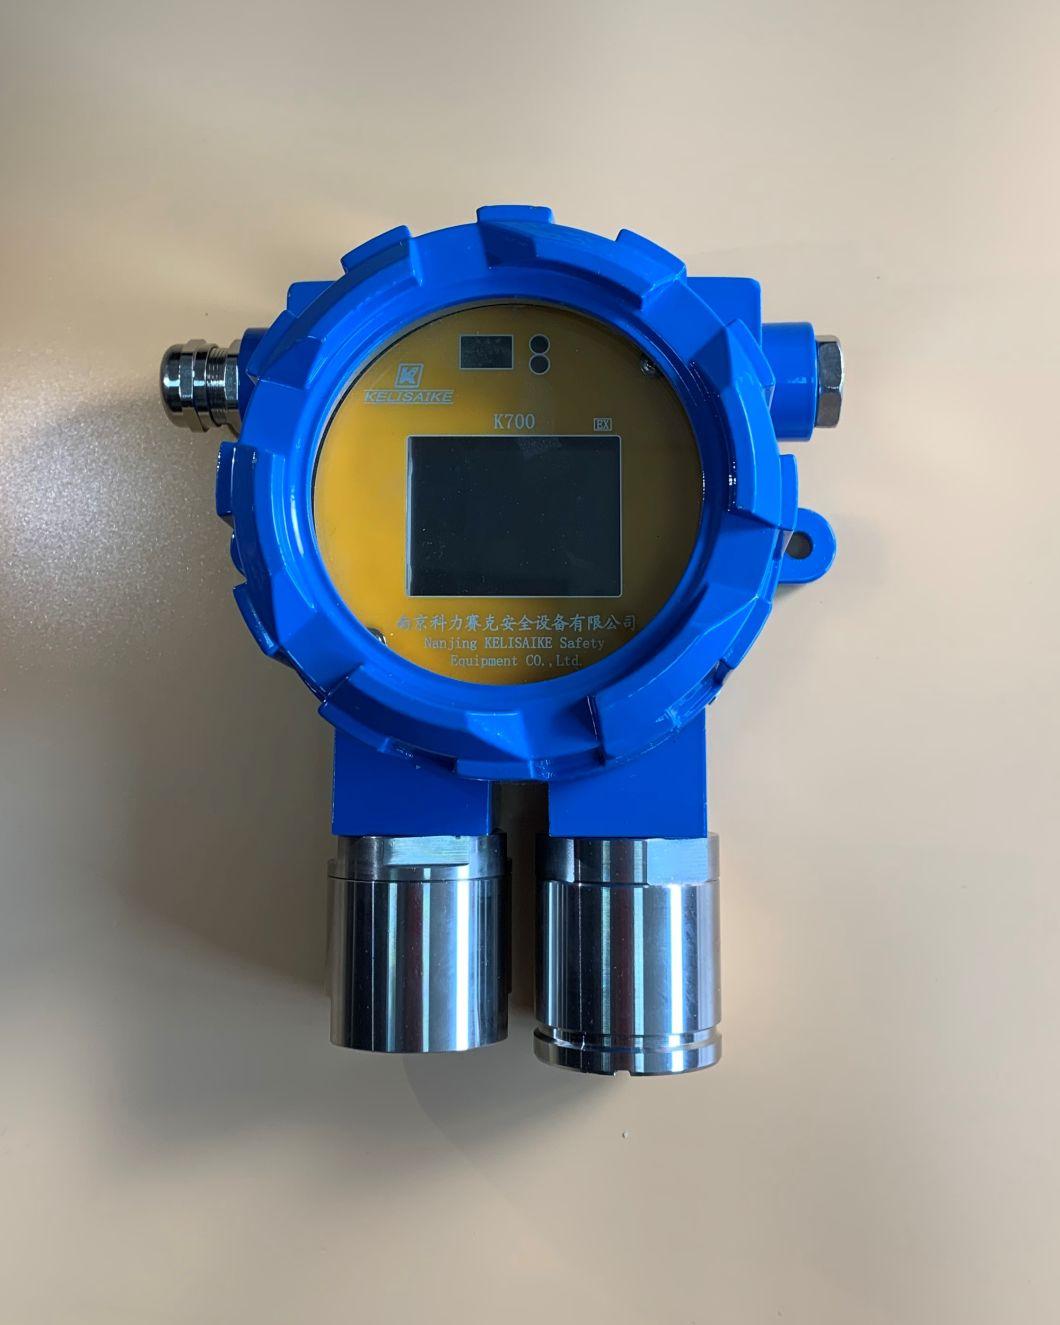 K700 Fixed Gas Sensor for Industrial Safety